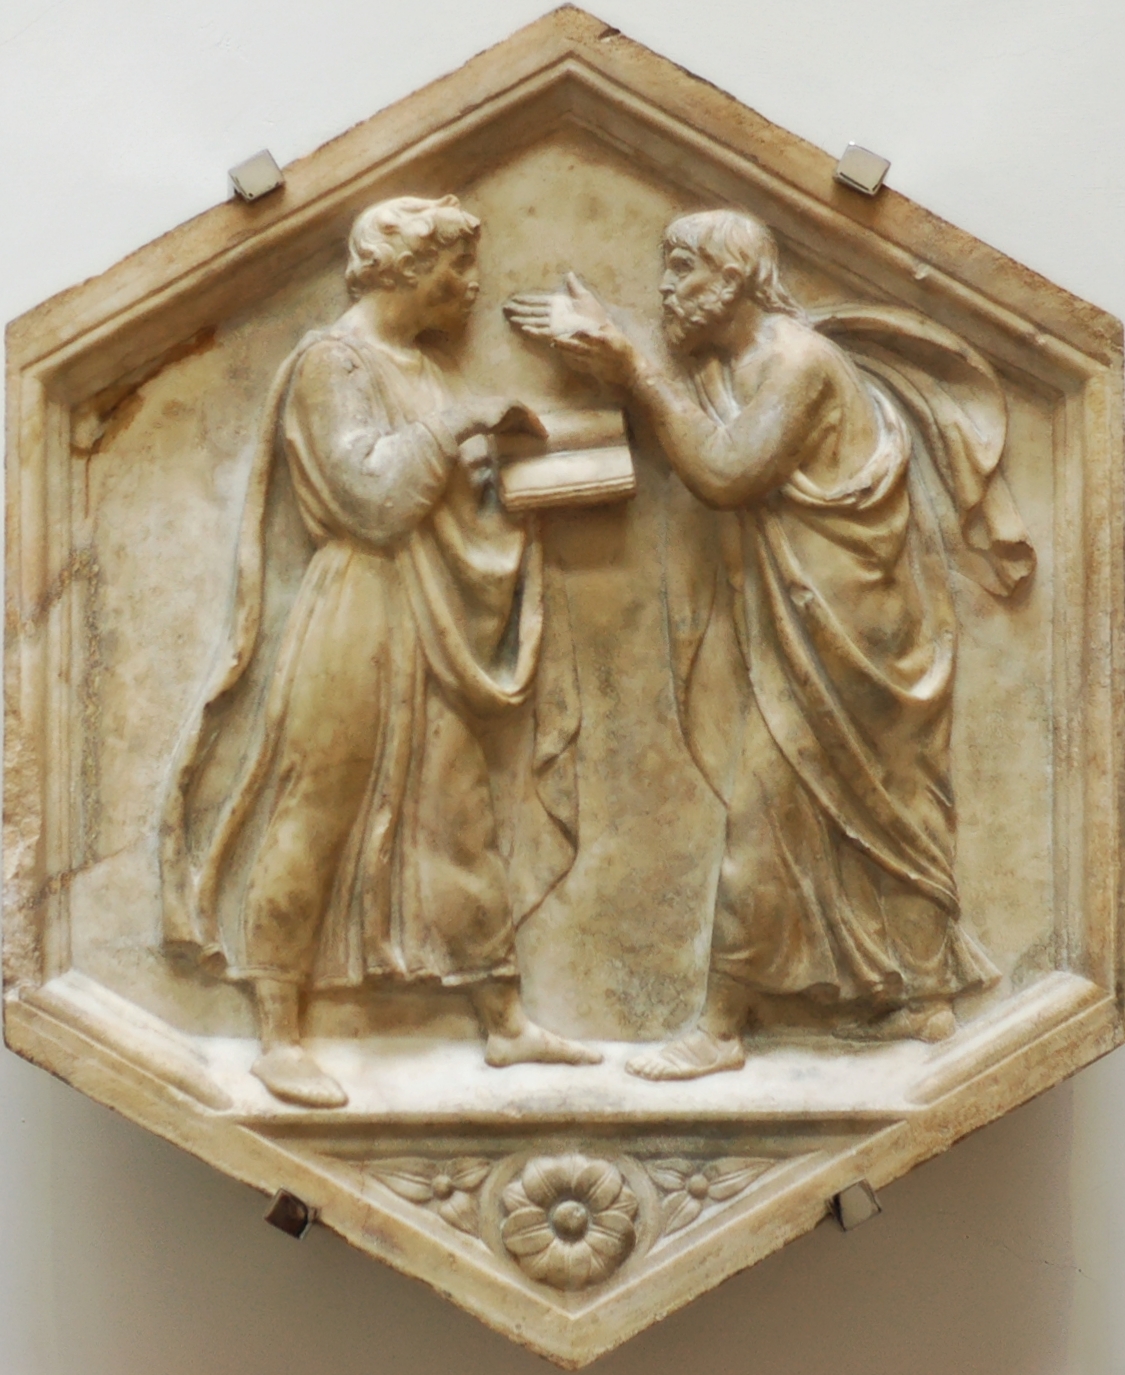 Plato and Aristotle in marble panel